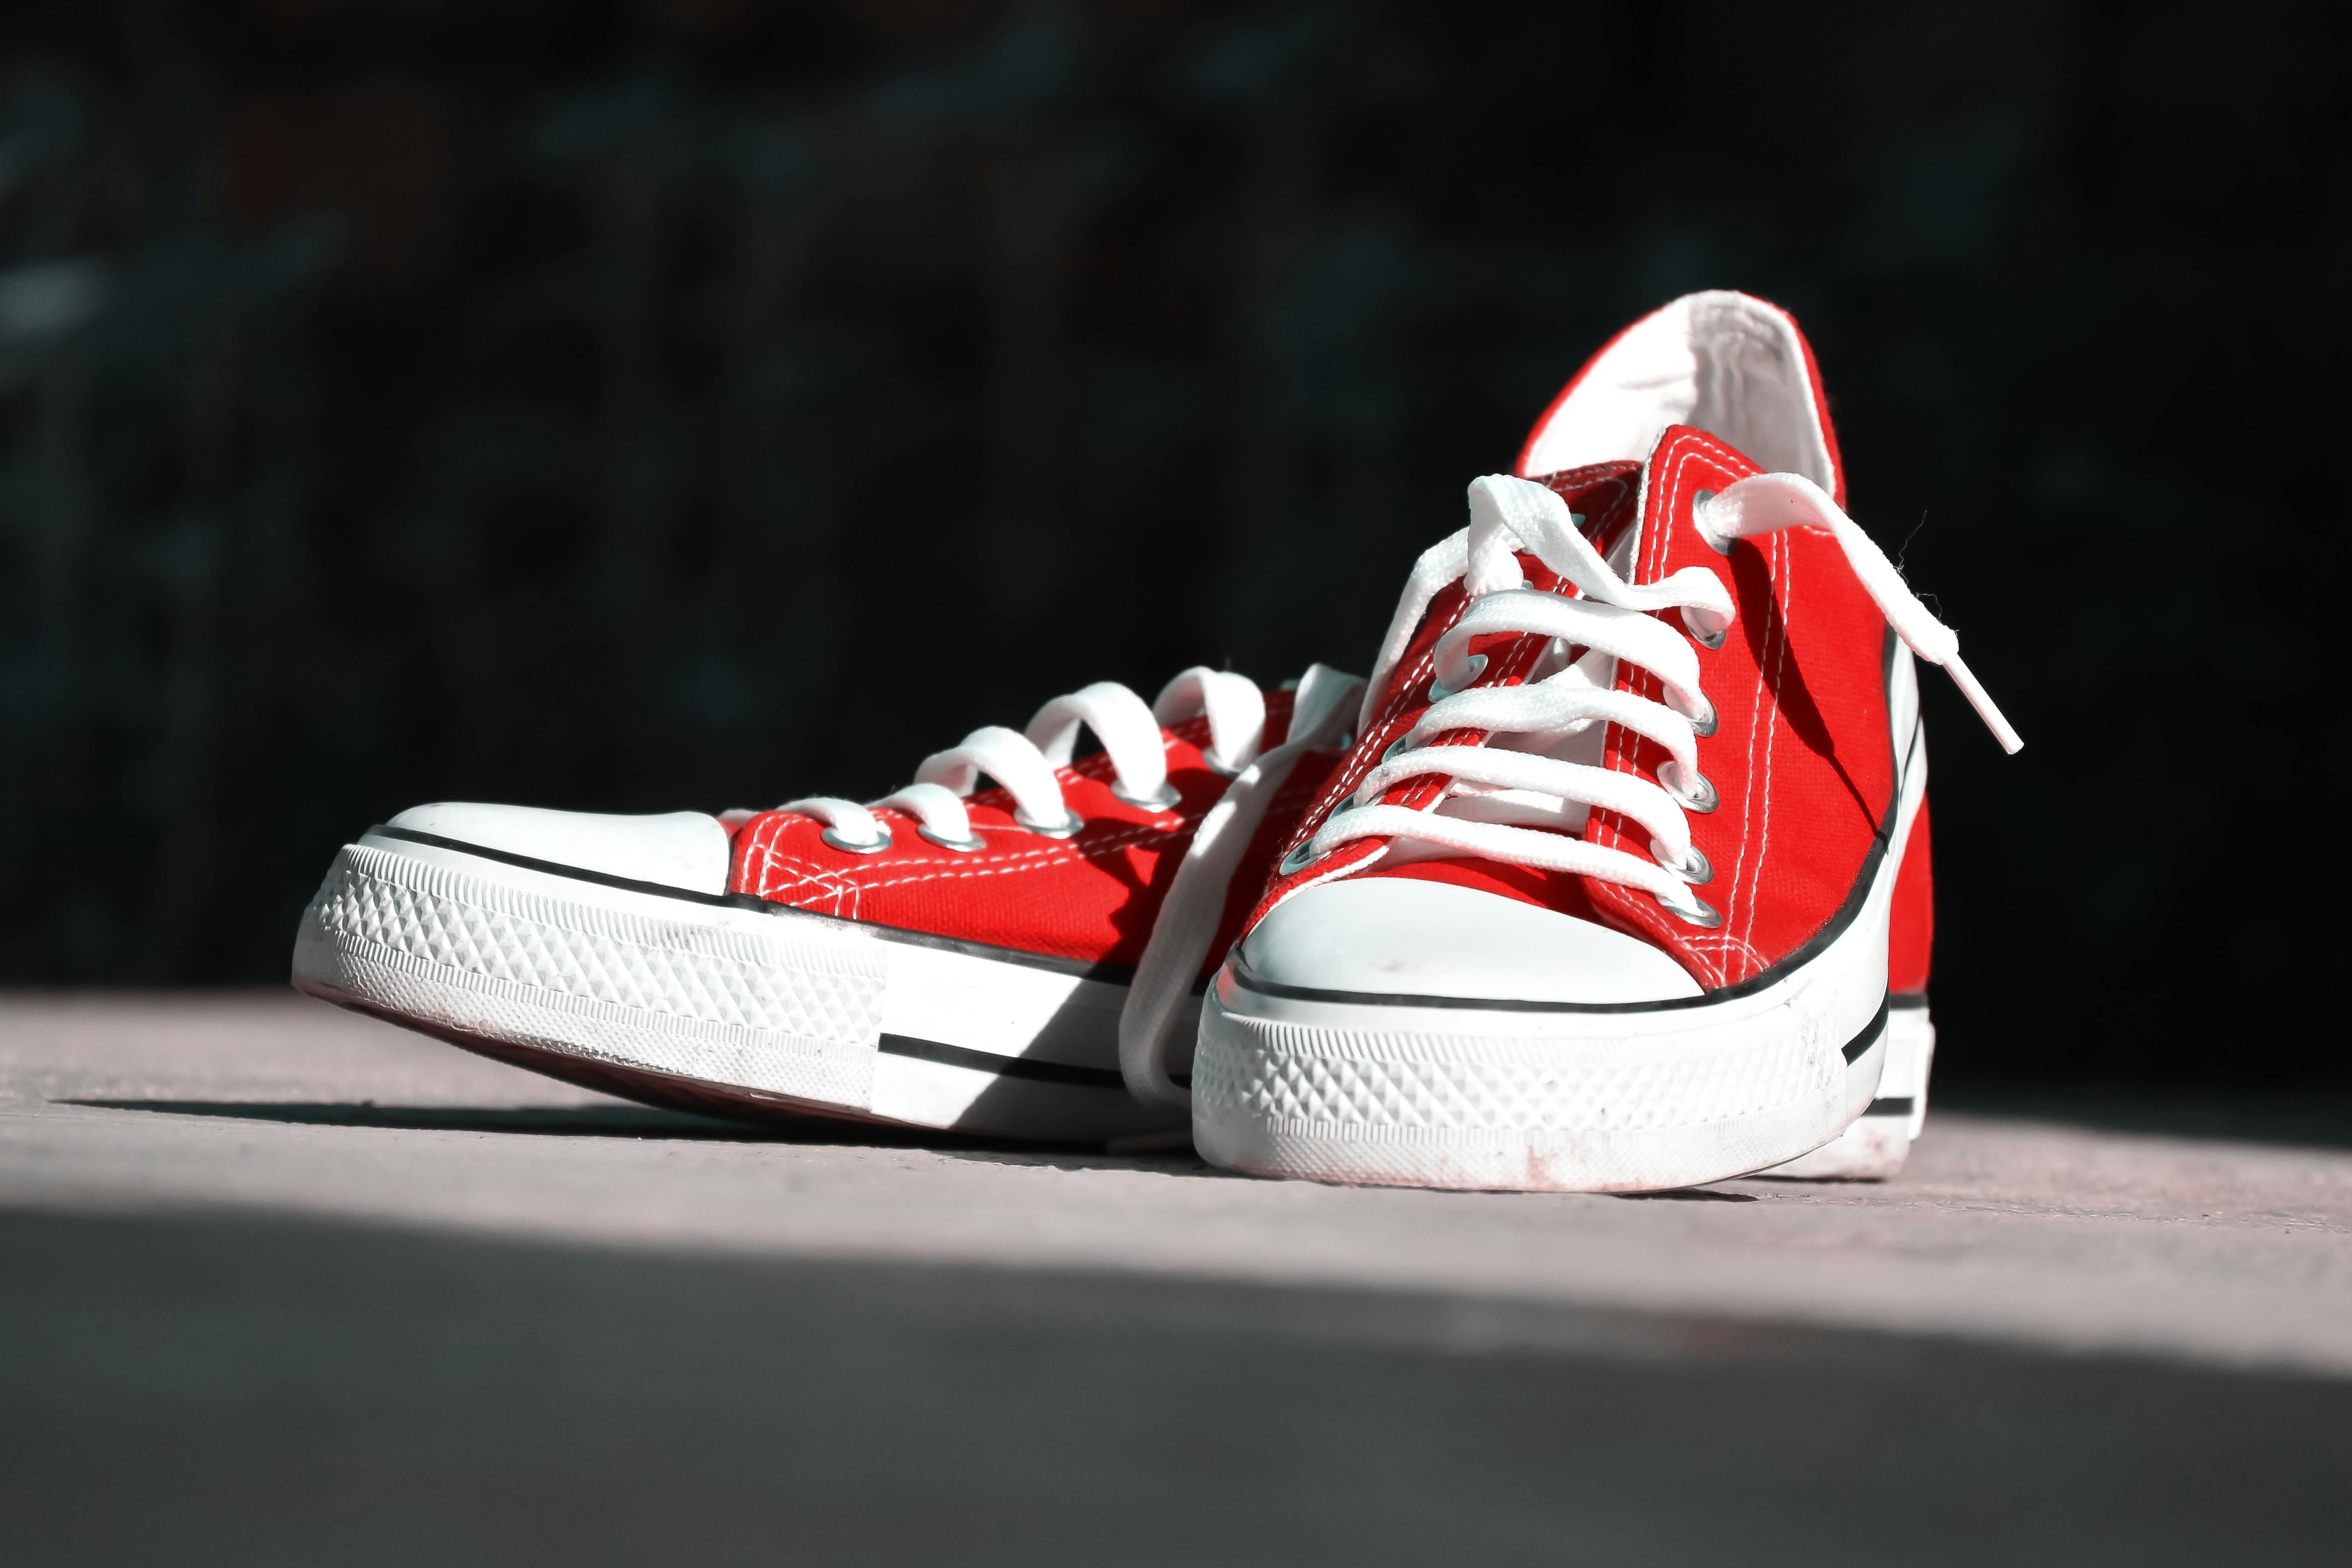 Shallow Focus Photography of Pair of Red Low-top Sneakers